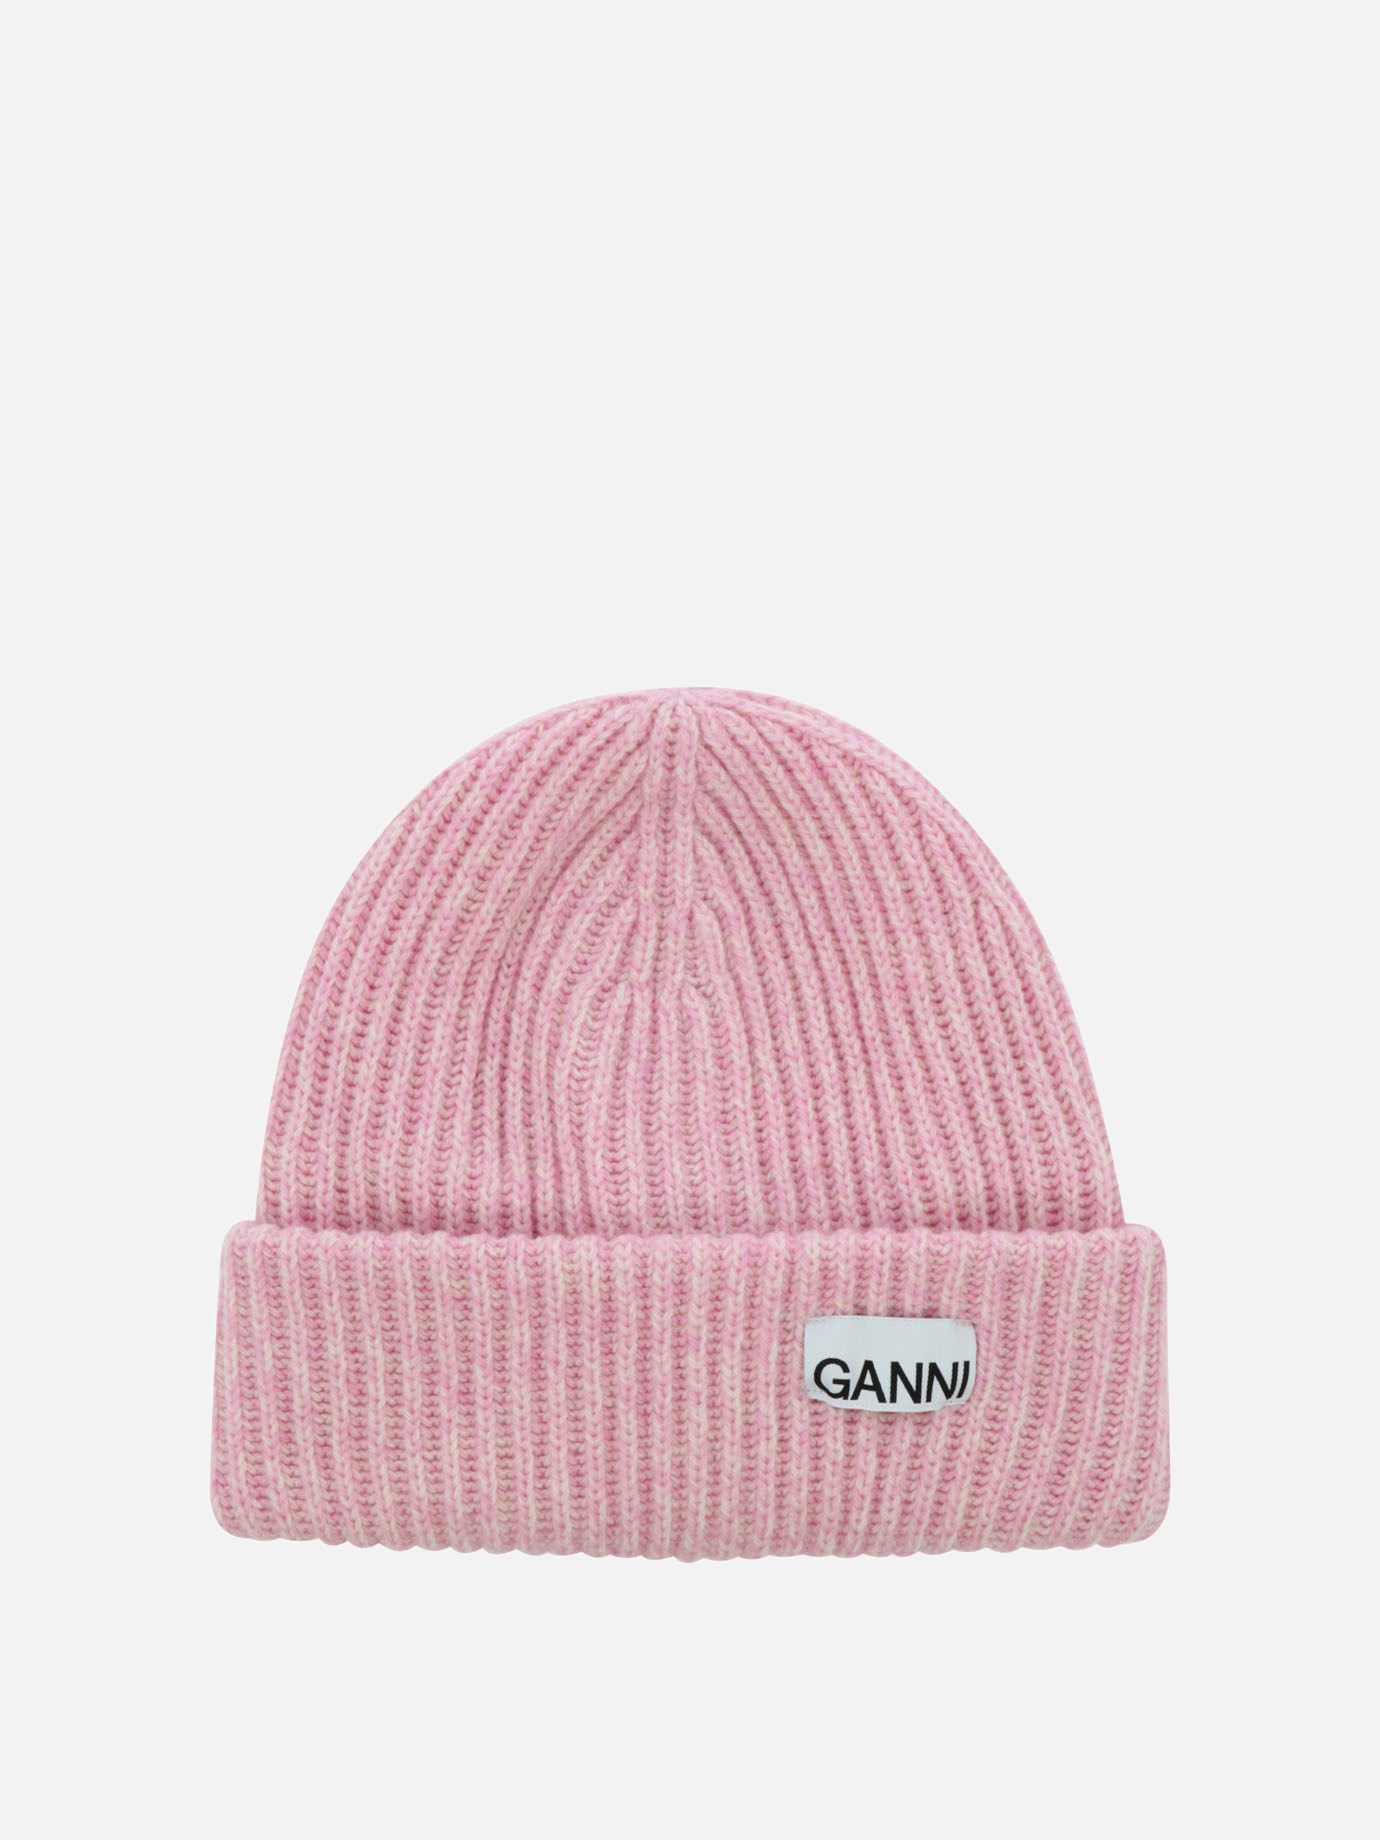 Ribbed hat with patchby Ganni - 2